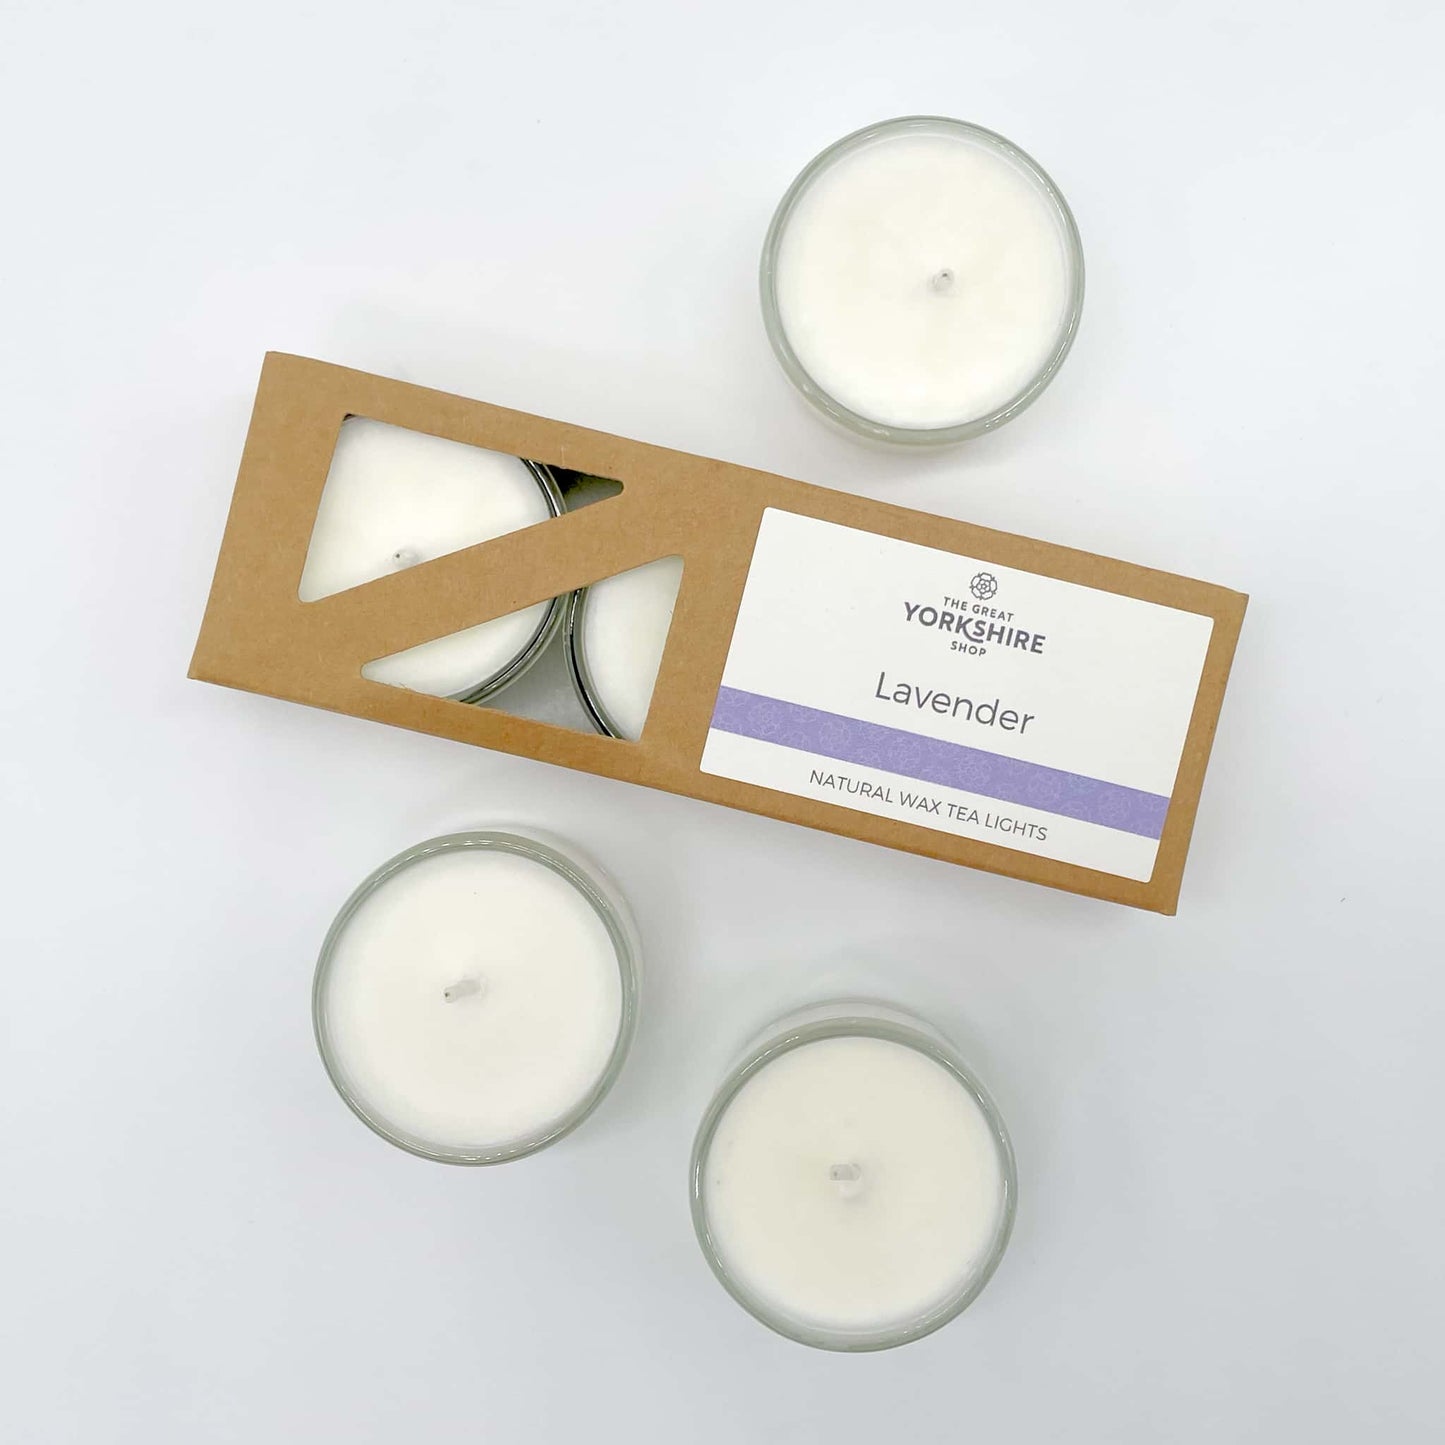 Lavender Natural Wax Tea Lights - The Great Yorkshire Shop